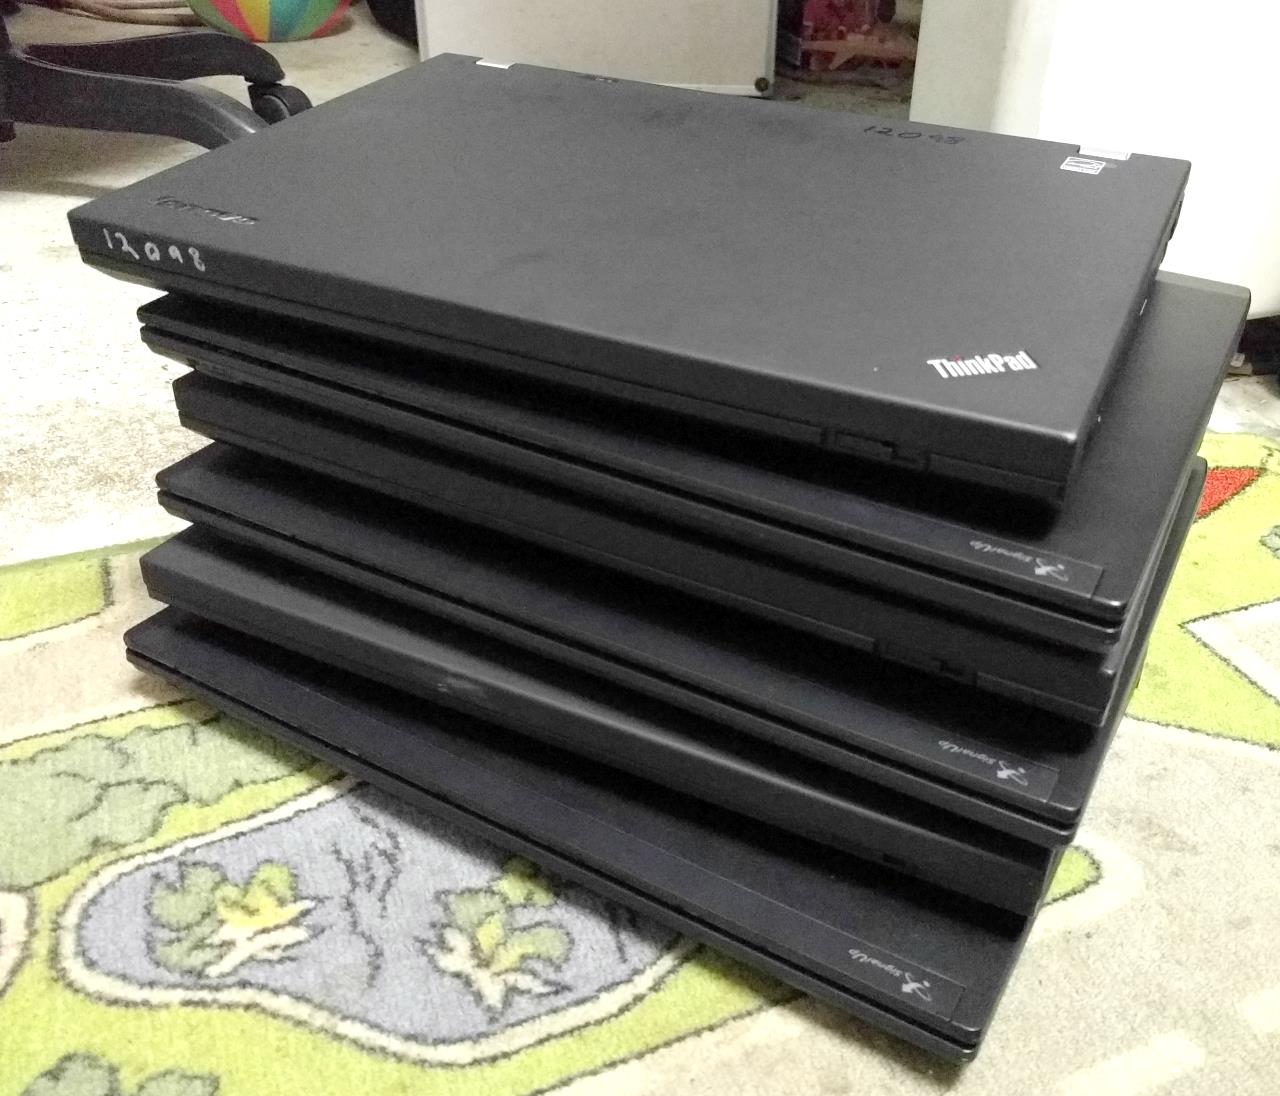 A stack of old laptops.